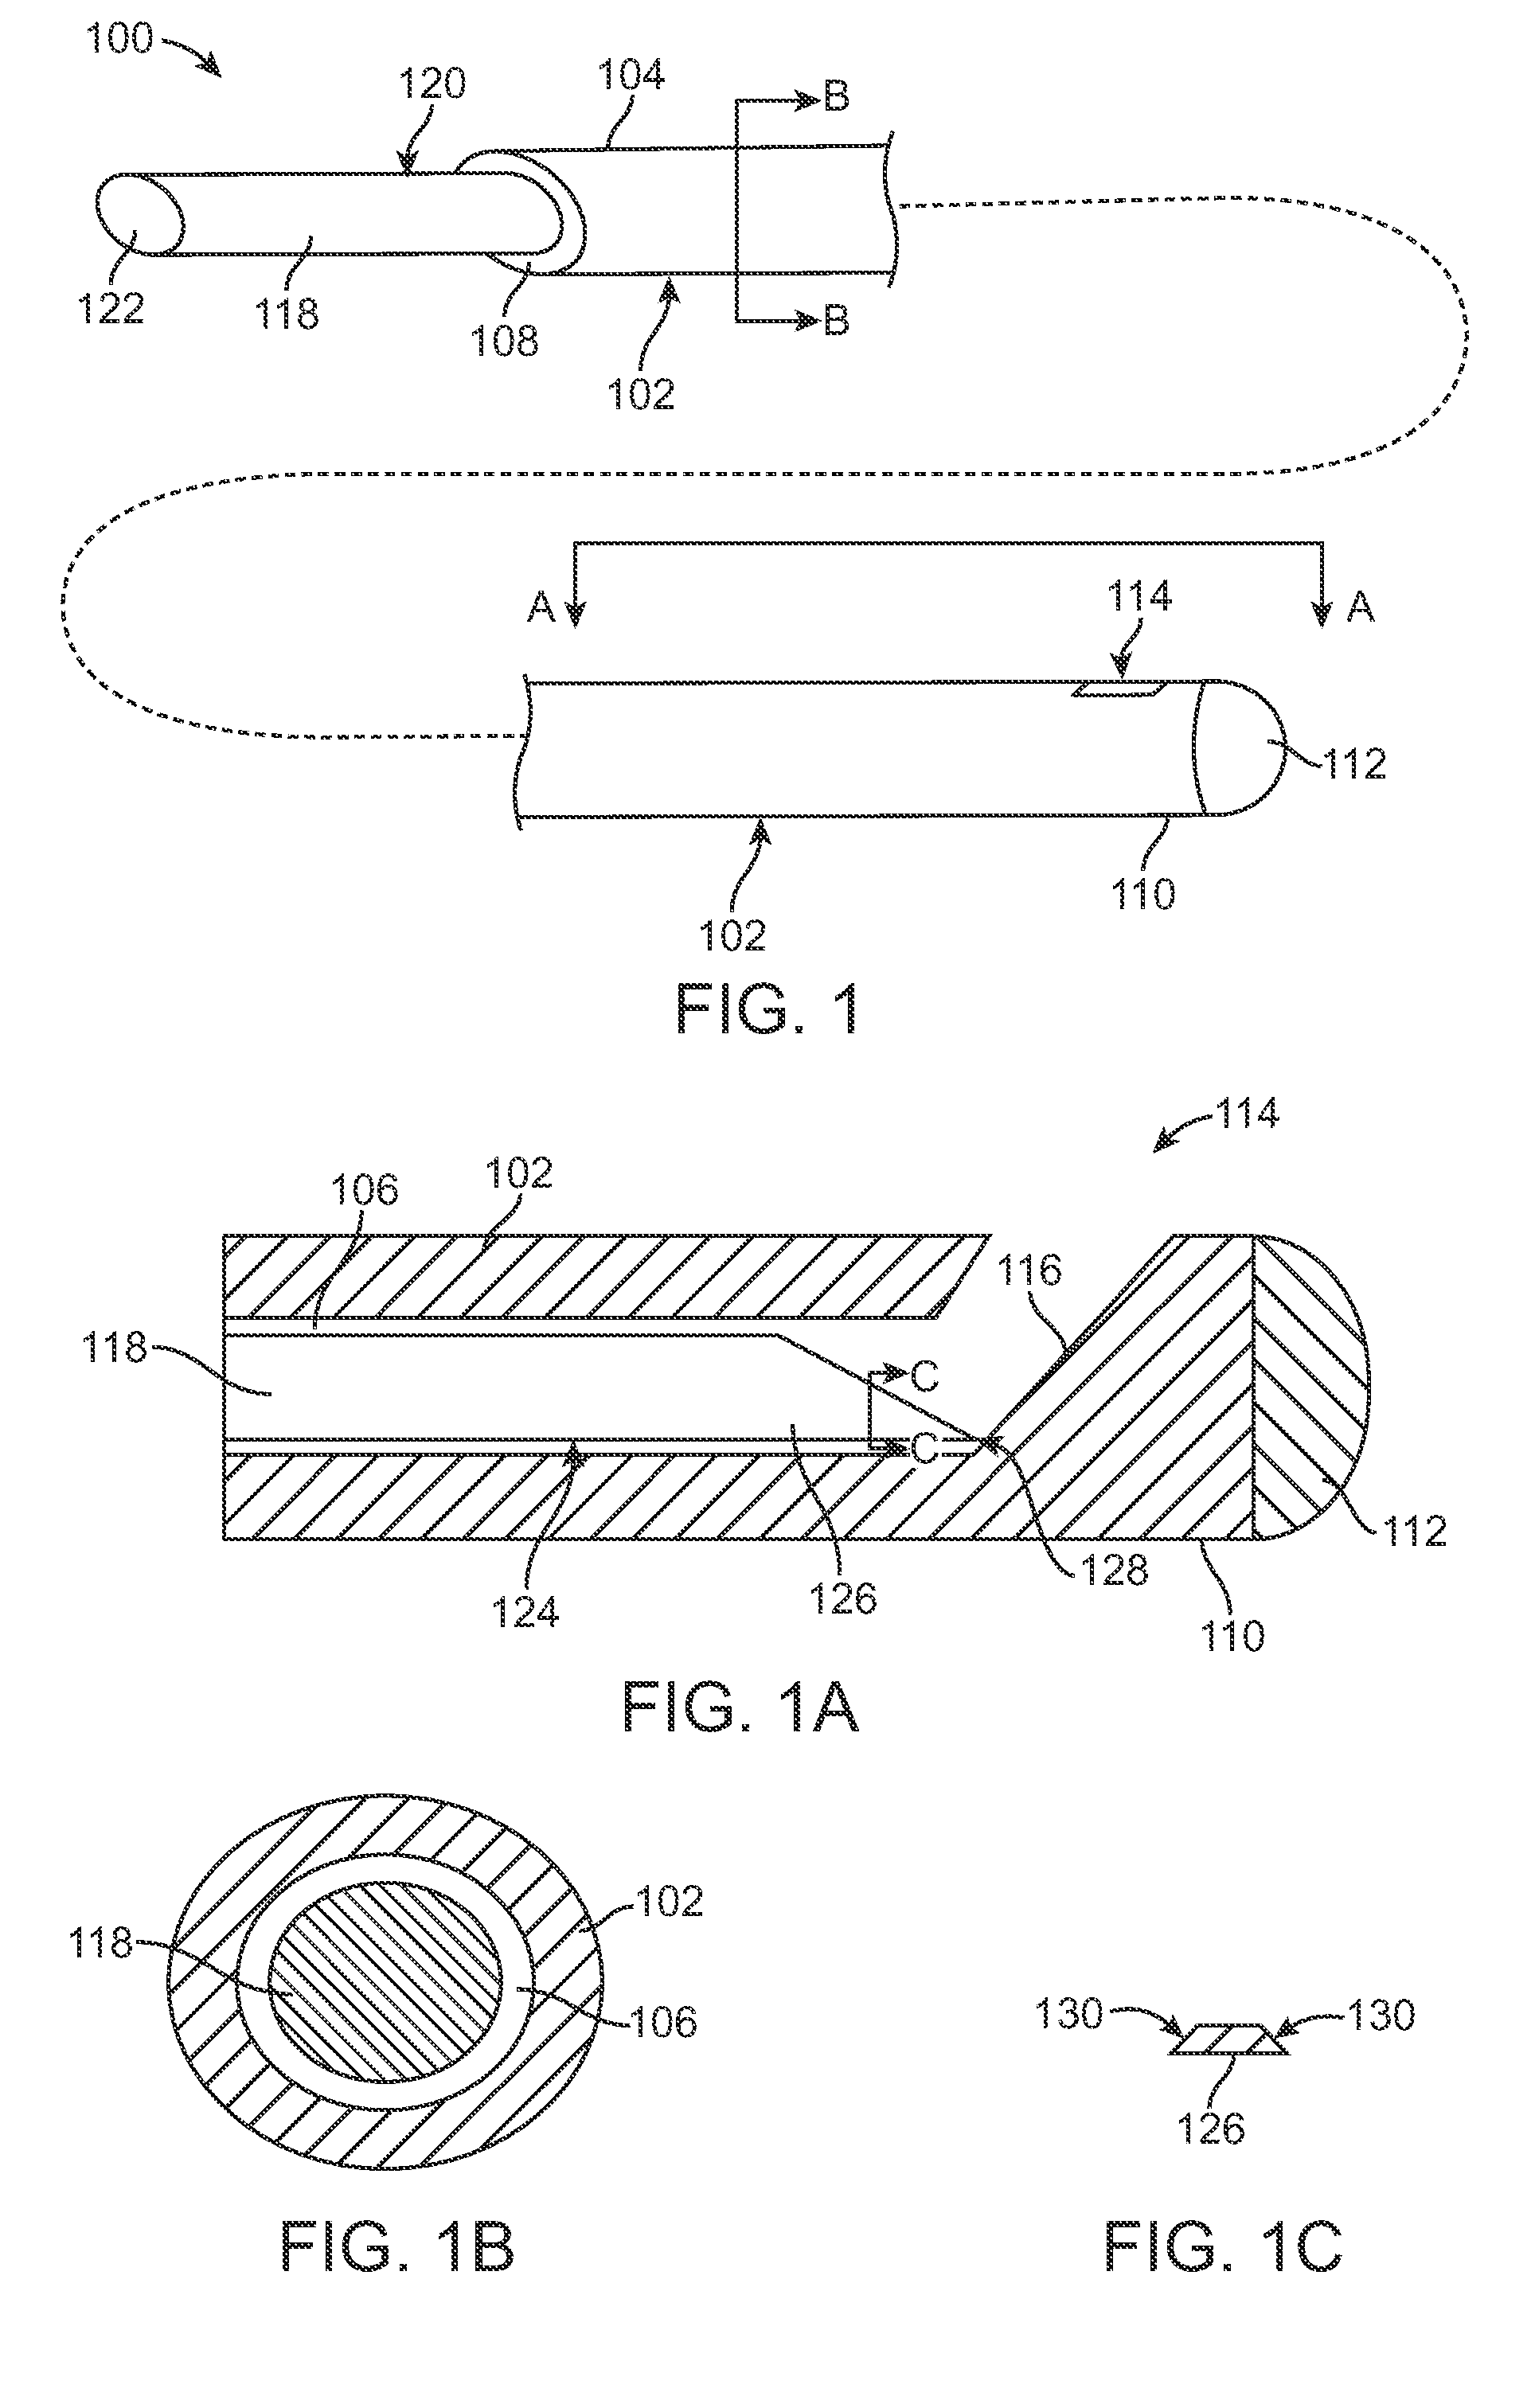 Methods and Systems for Bypassing an Occlusion in a Blood Vessel